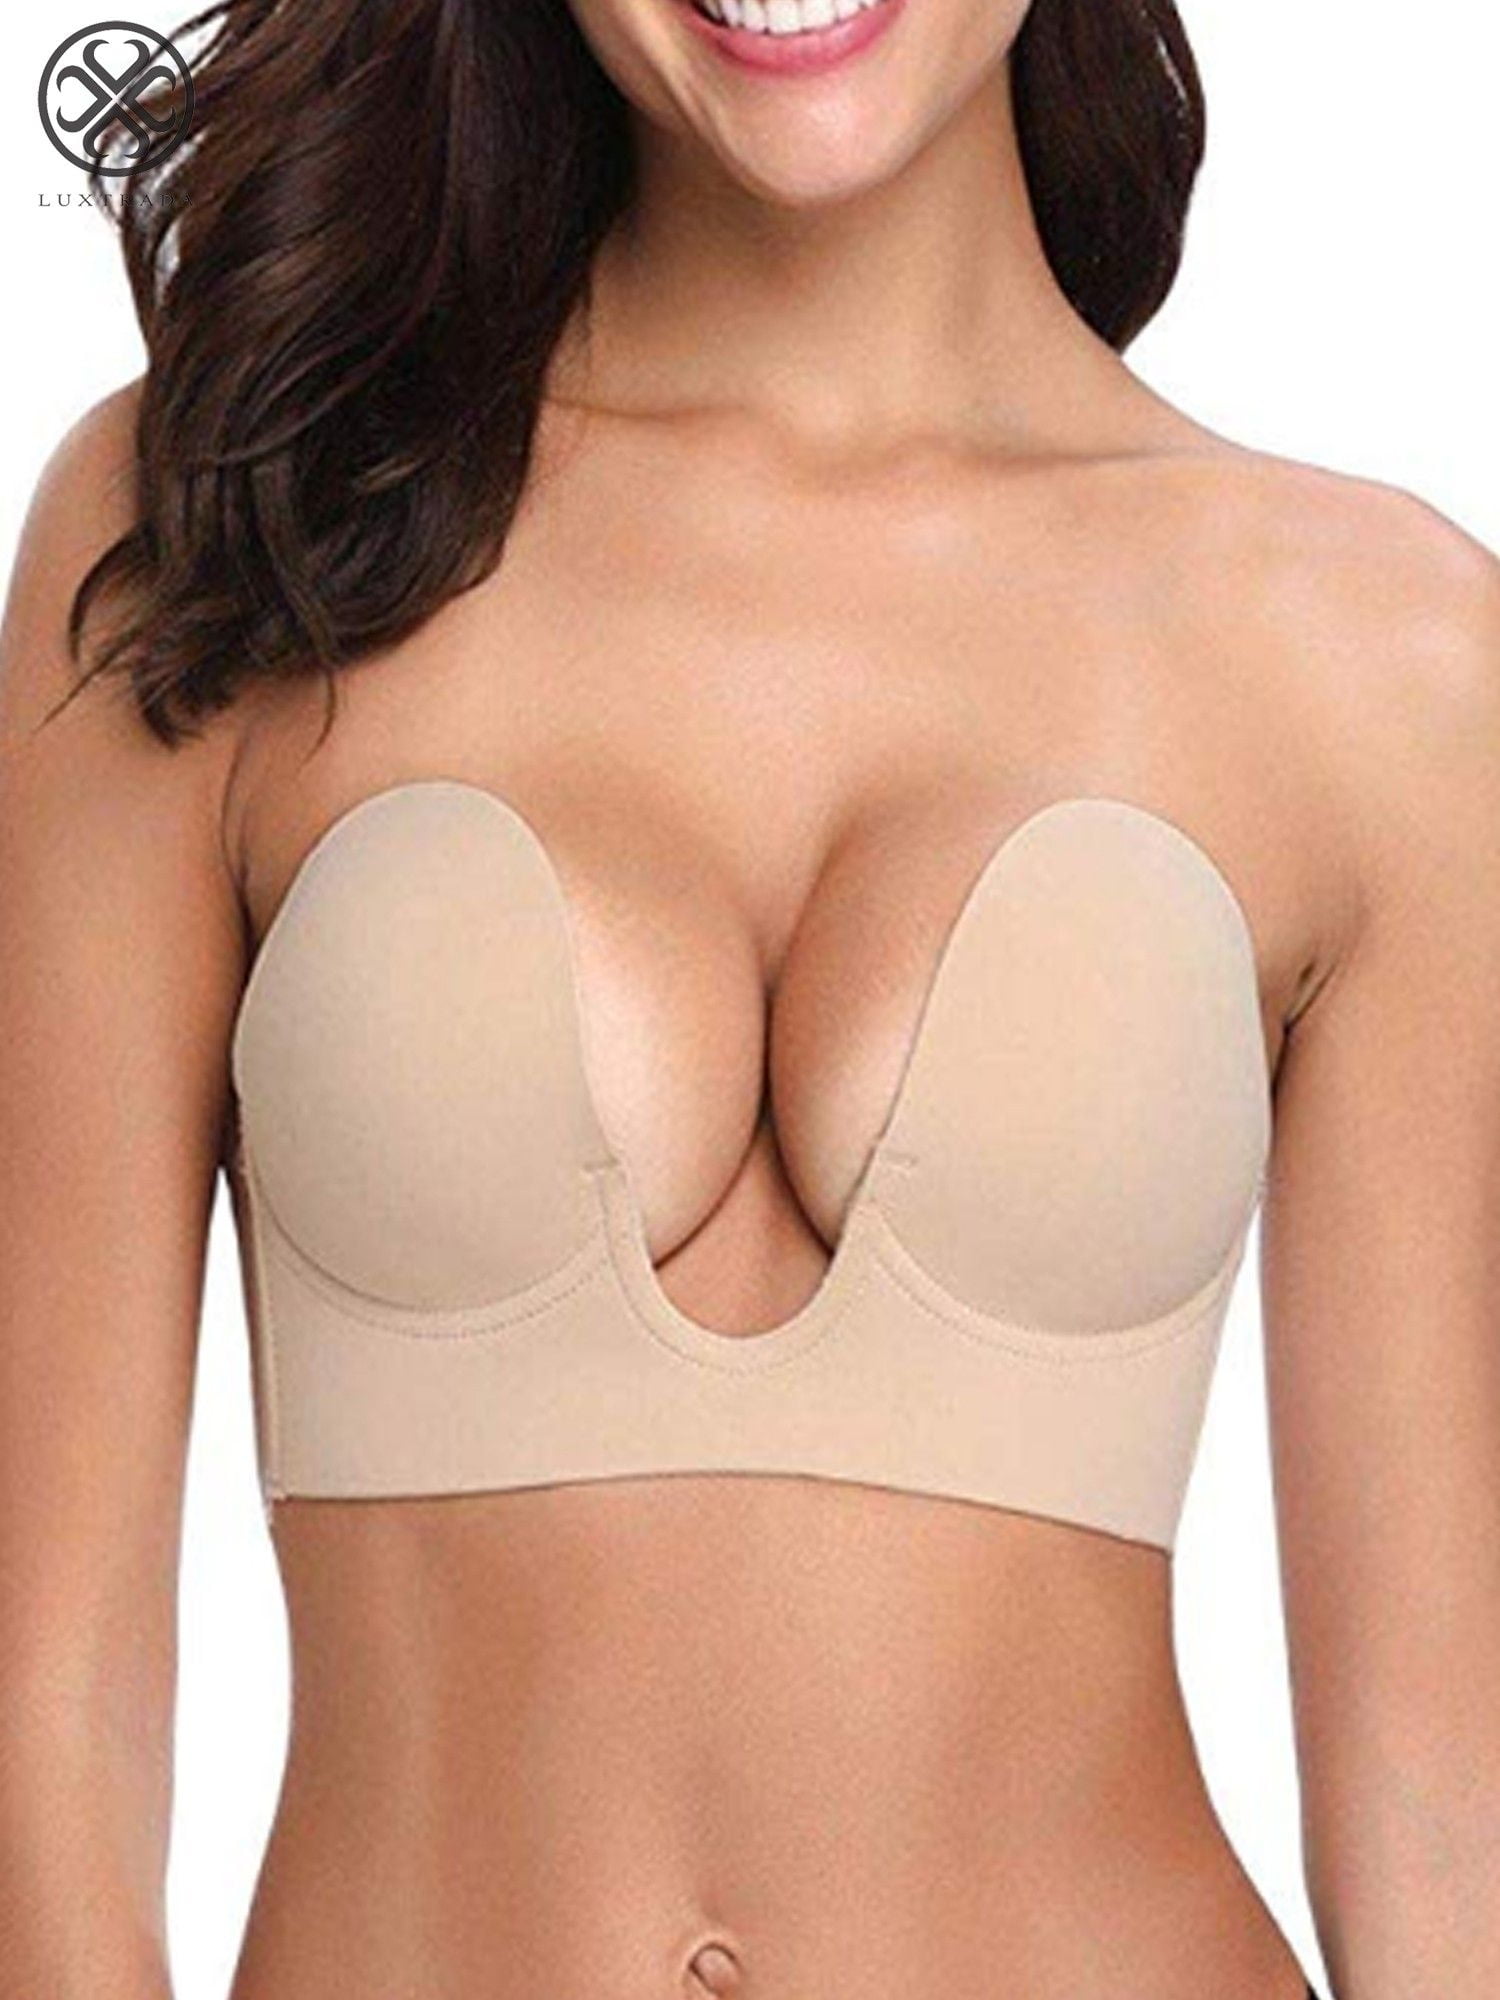 Mascarry Strapless Sticky Bra Backless Bra Invisible Silicone Bras Push up  Bra for Women, Beige